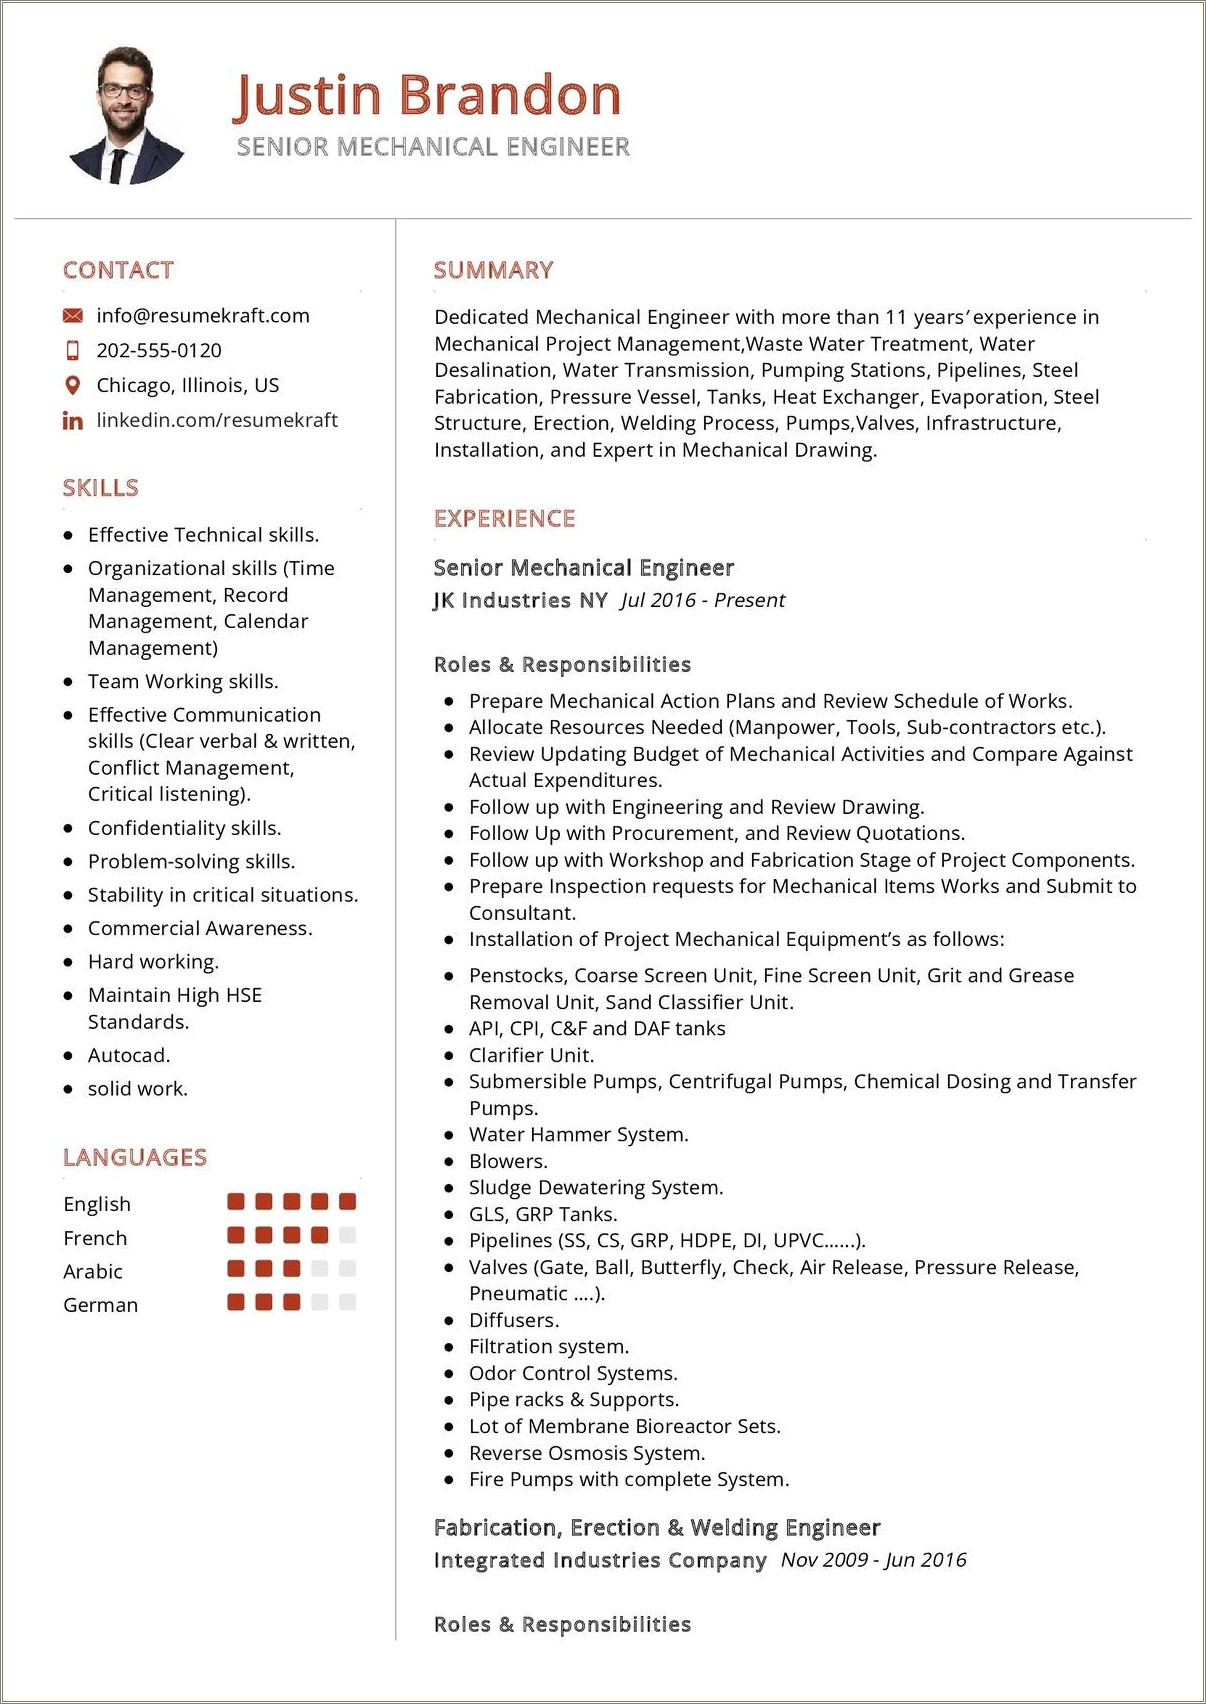 Download Sample Resume For Experienced Mechanical Engineer